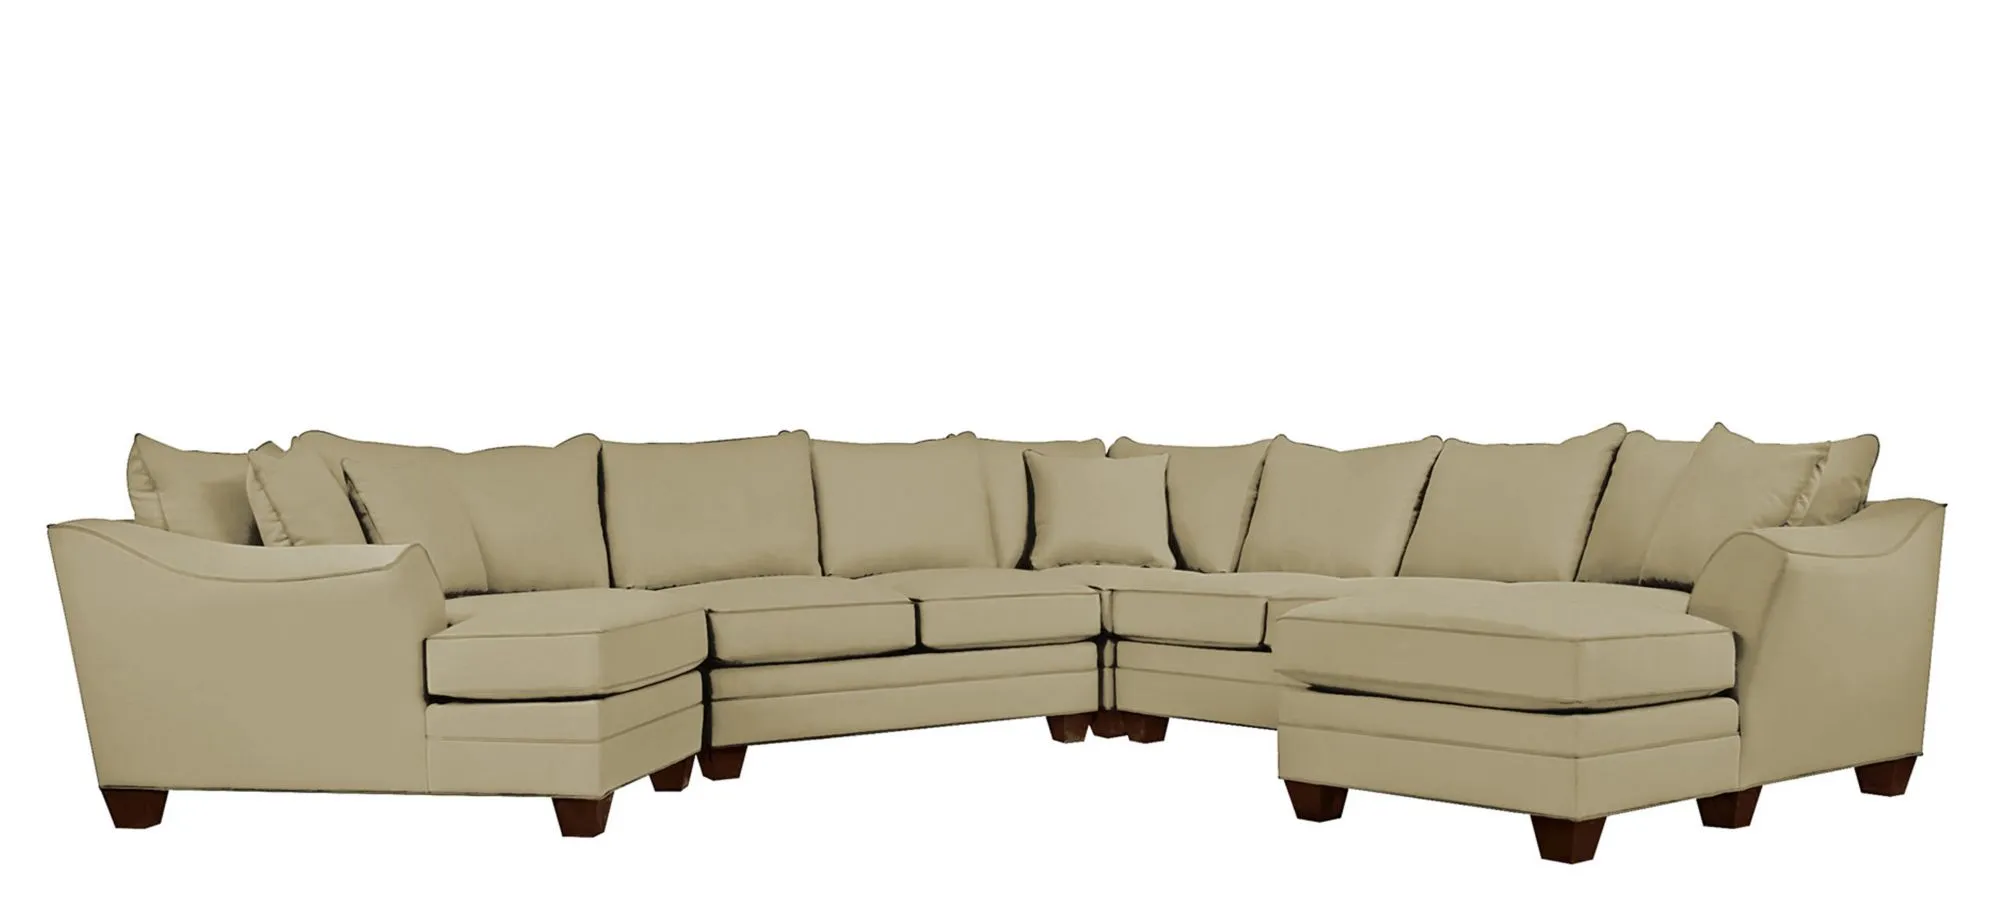 Foresthill 5-pc. Right Hand Facing Sectional Sofa in Suede So Soft Vanilla by H.M. Richards